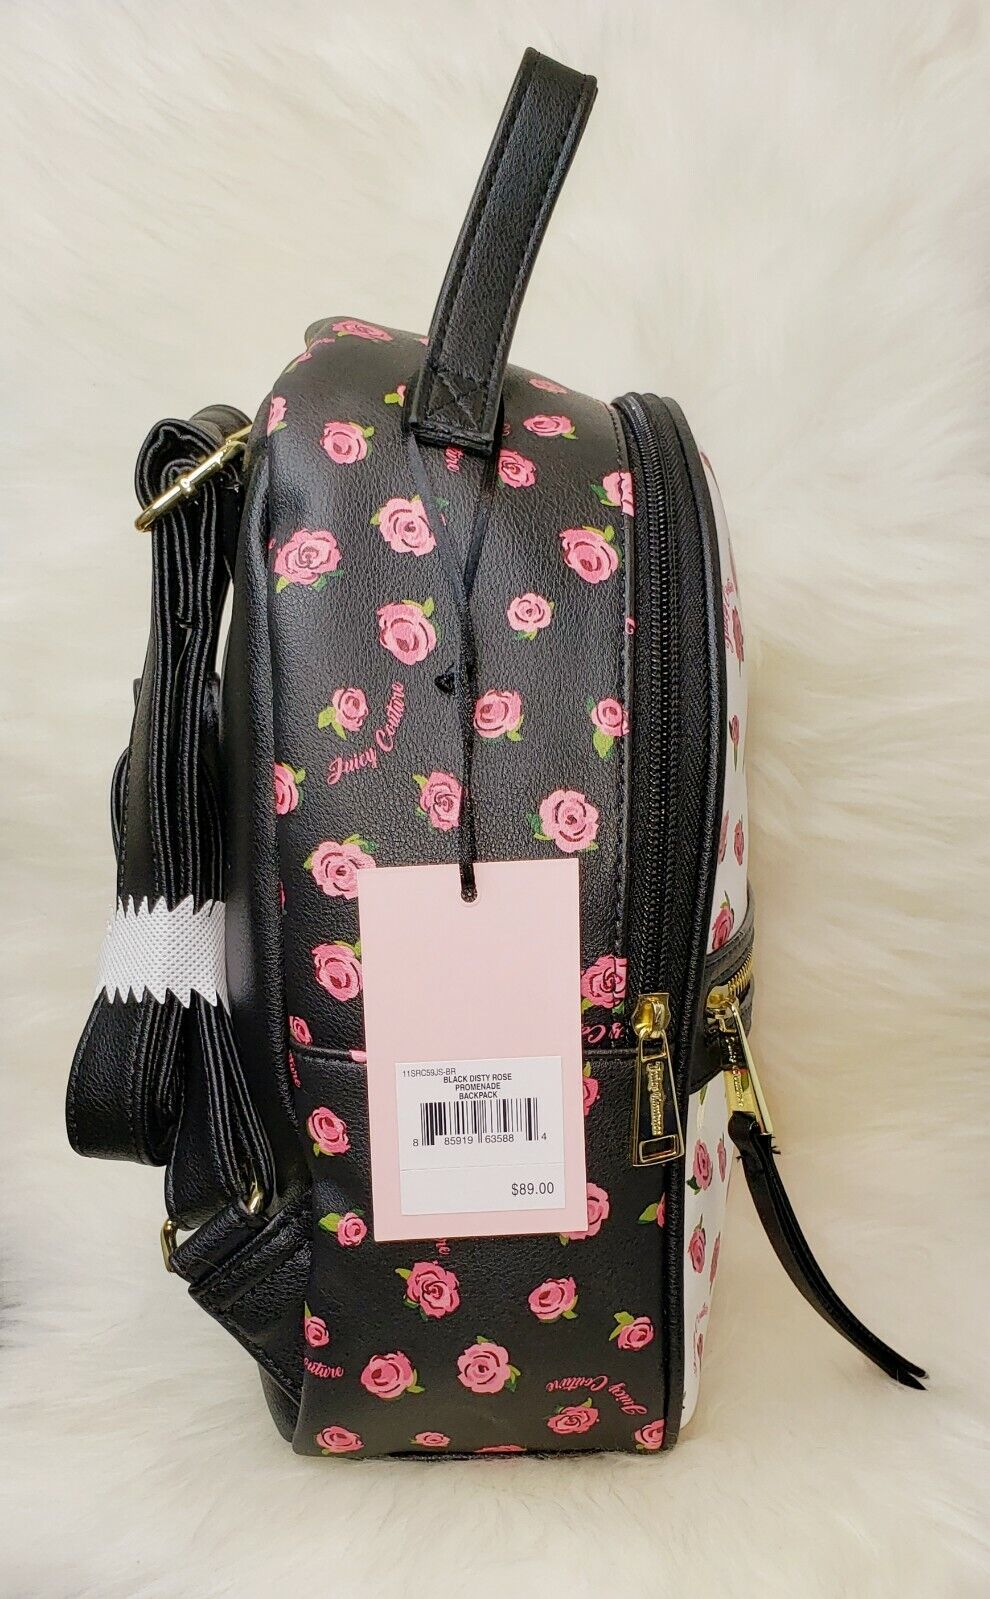 Juicy Couture Black Disty Rose Promenade Backpack Leather Purse 